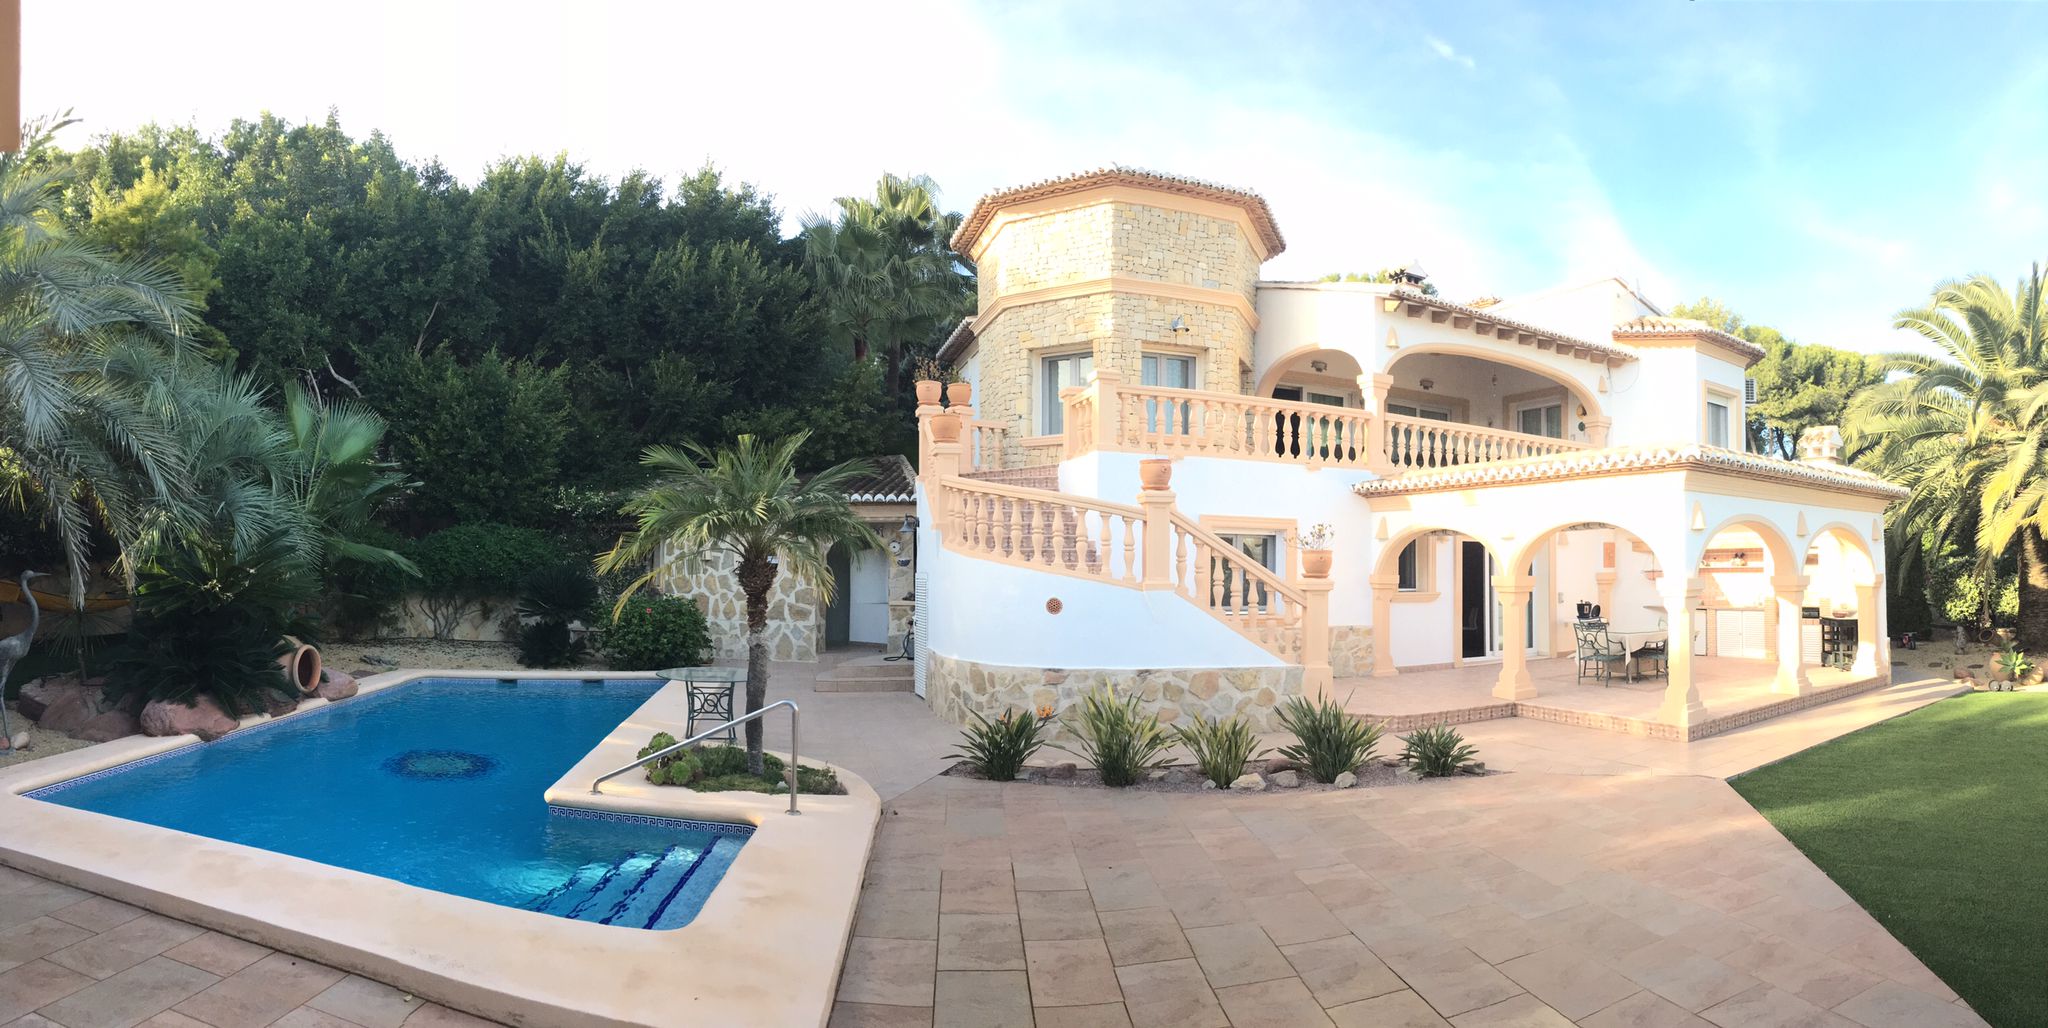 Lovely villa with sea views. Property with 5 bedrooms built on the a spacious plot near the always beautiful beach in Moraira